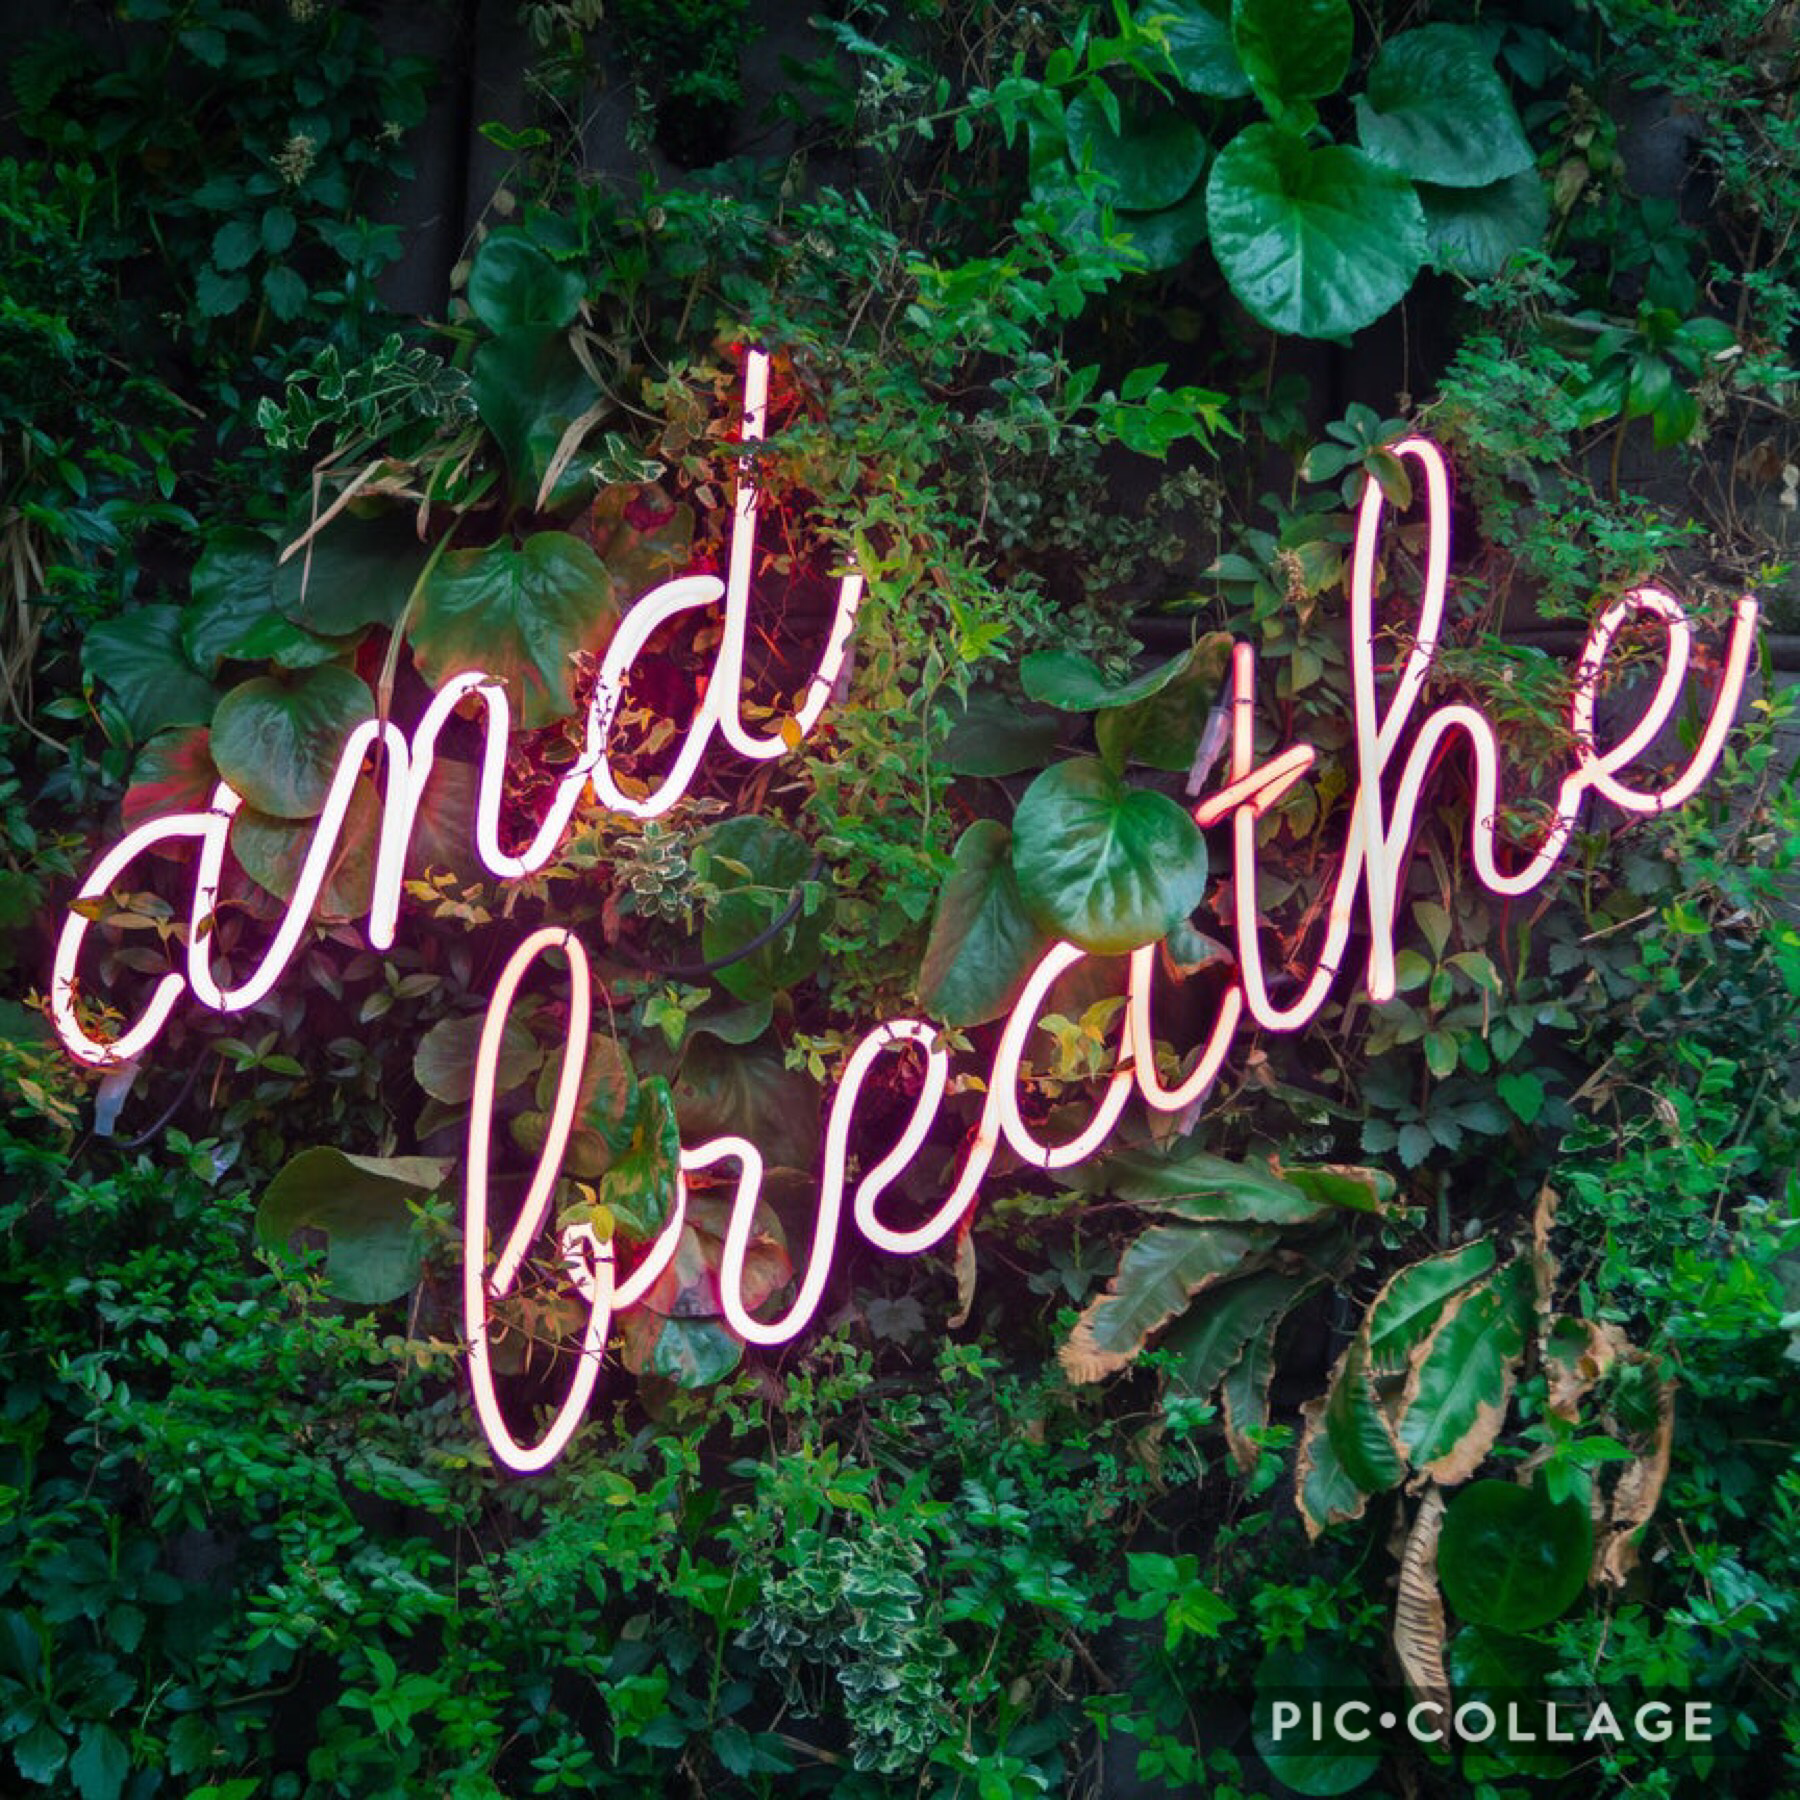 remember to just pause once in a while, take a breath and just relax❤️Take a day during the week to organize yourself, care for yourself so you can be the best you for the rest of the week☺️❤️I designate Sunday for relaxing so that’s a way you can self-ca